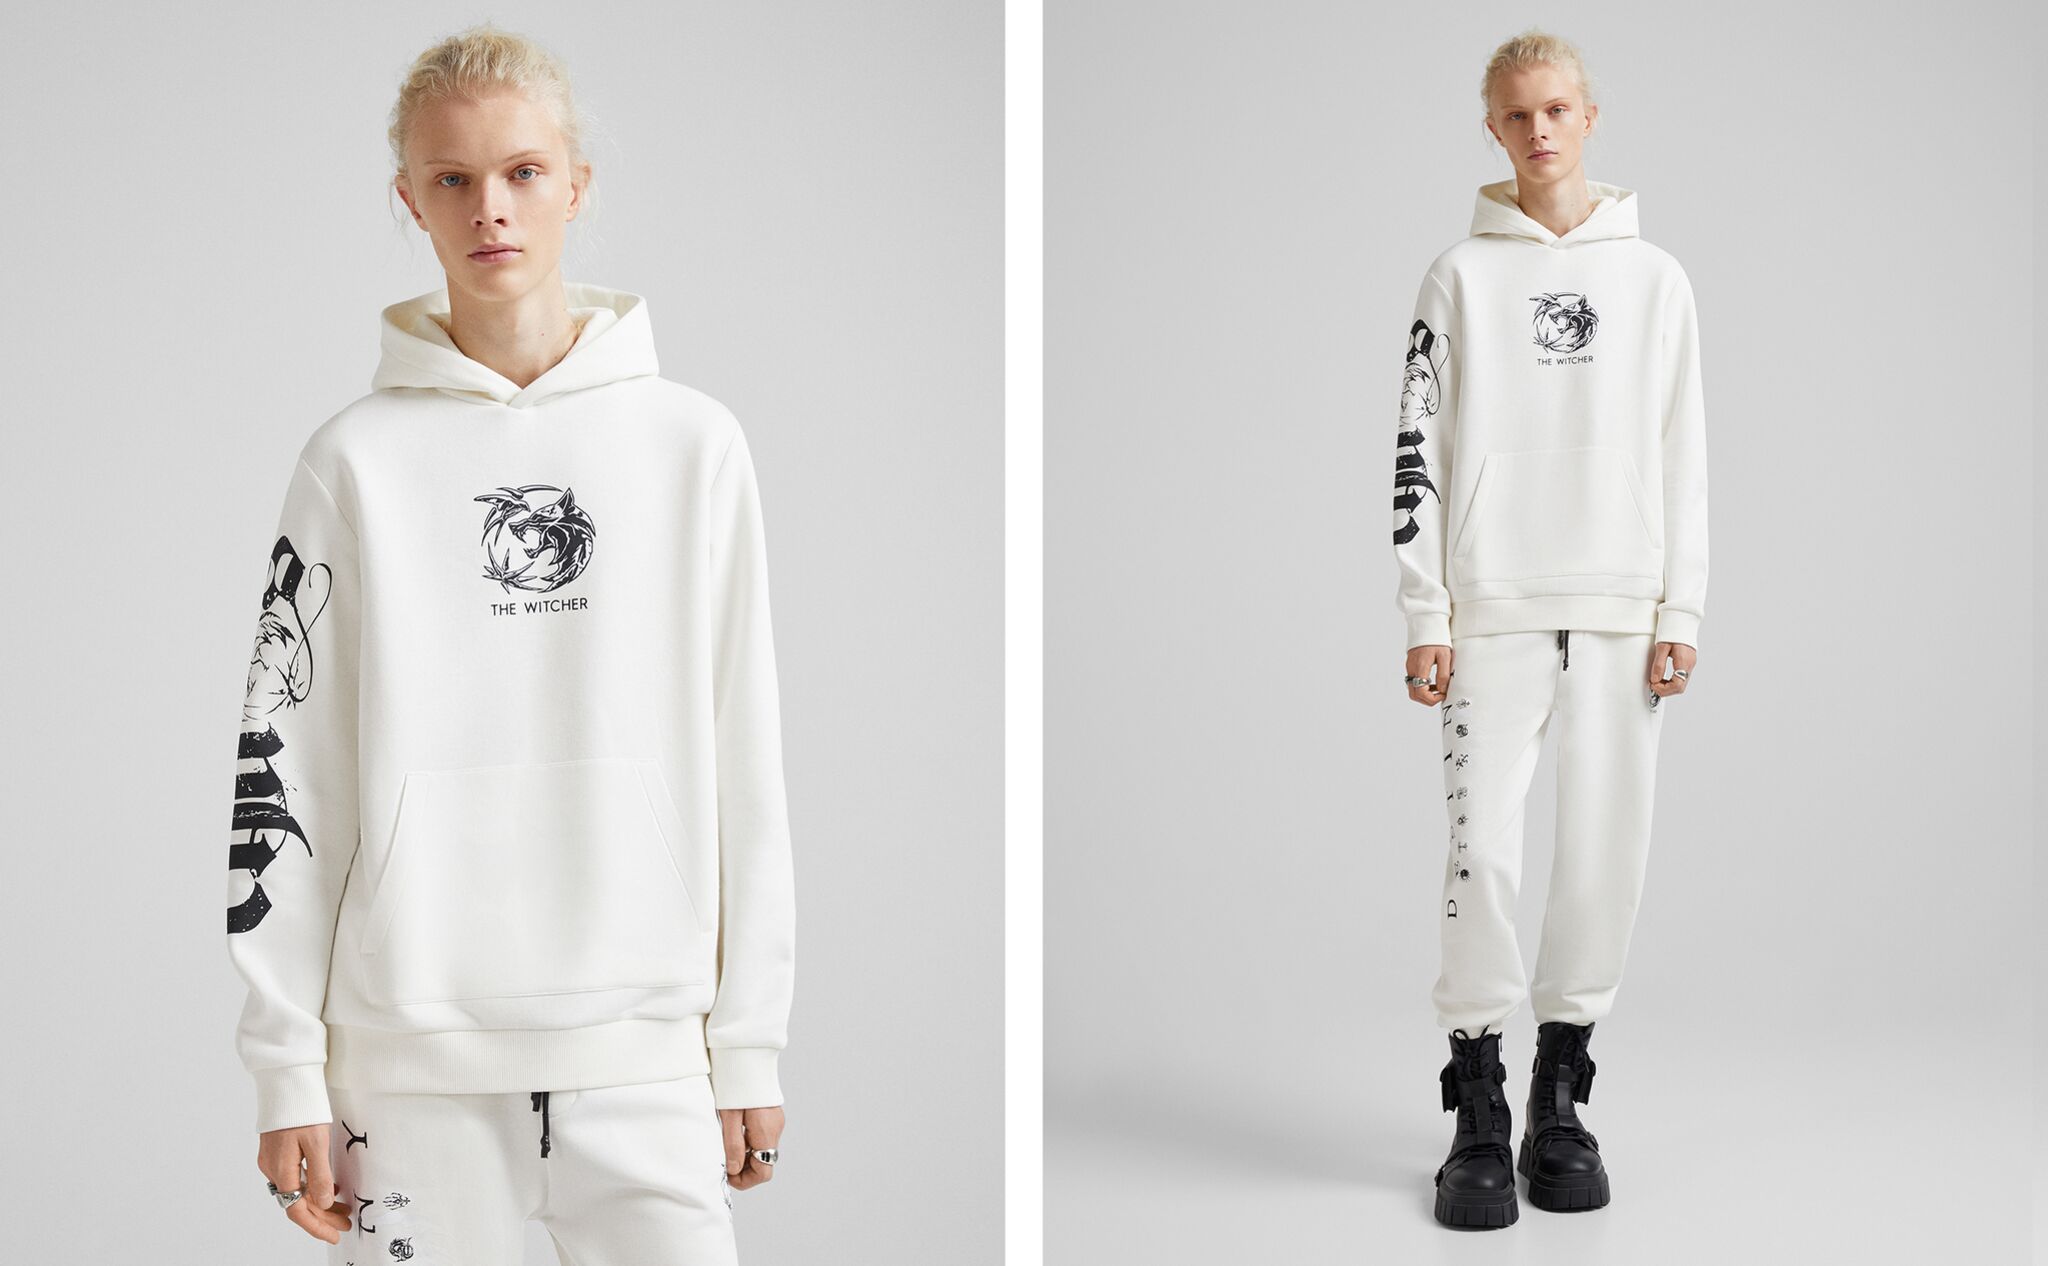 THE WITCHER sweatshirt and trousers set